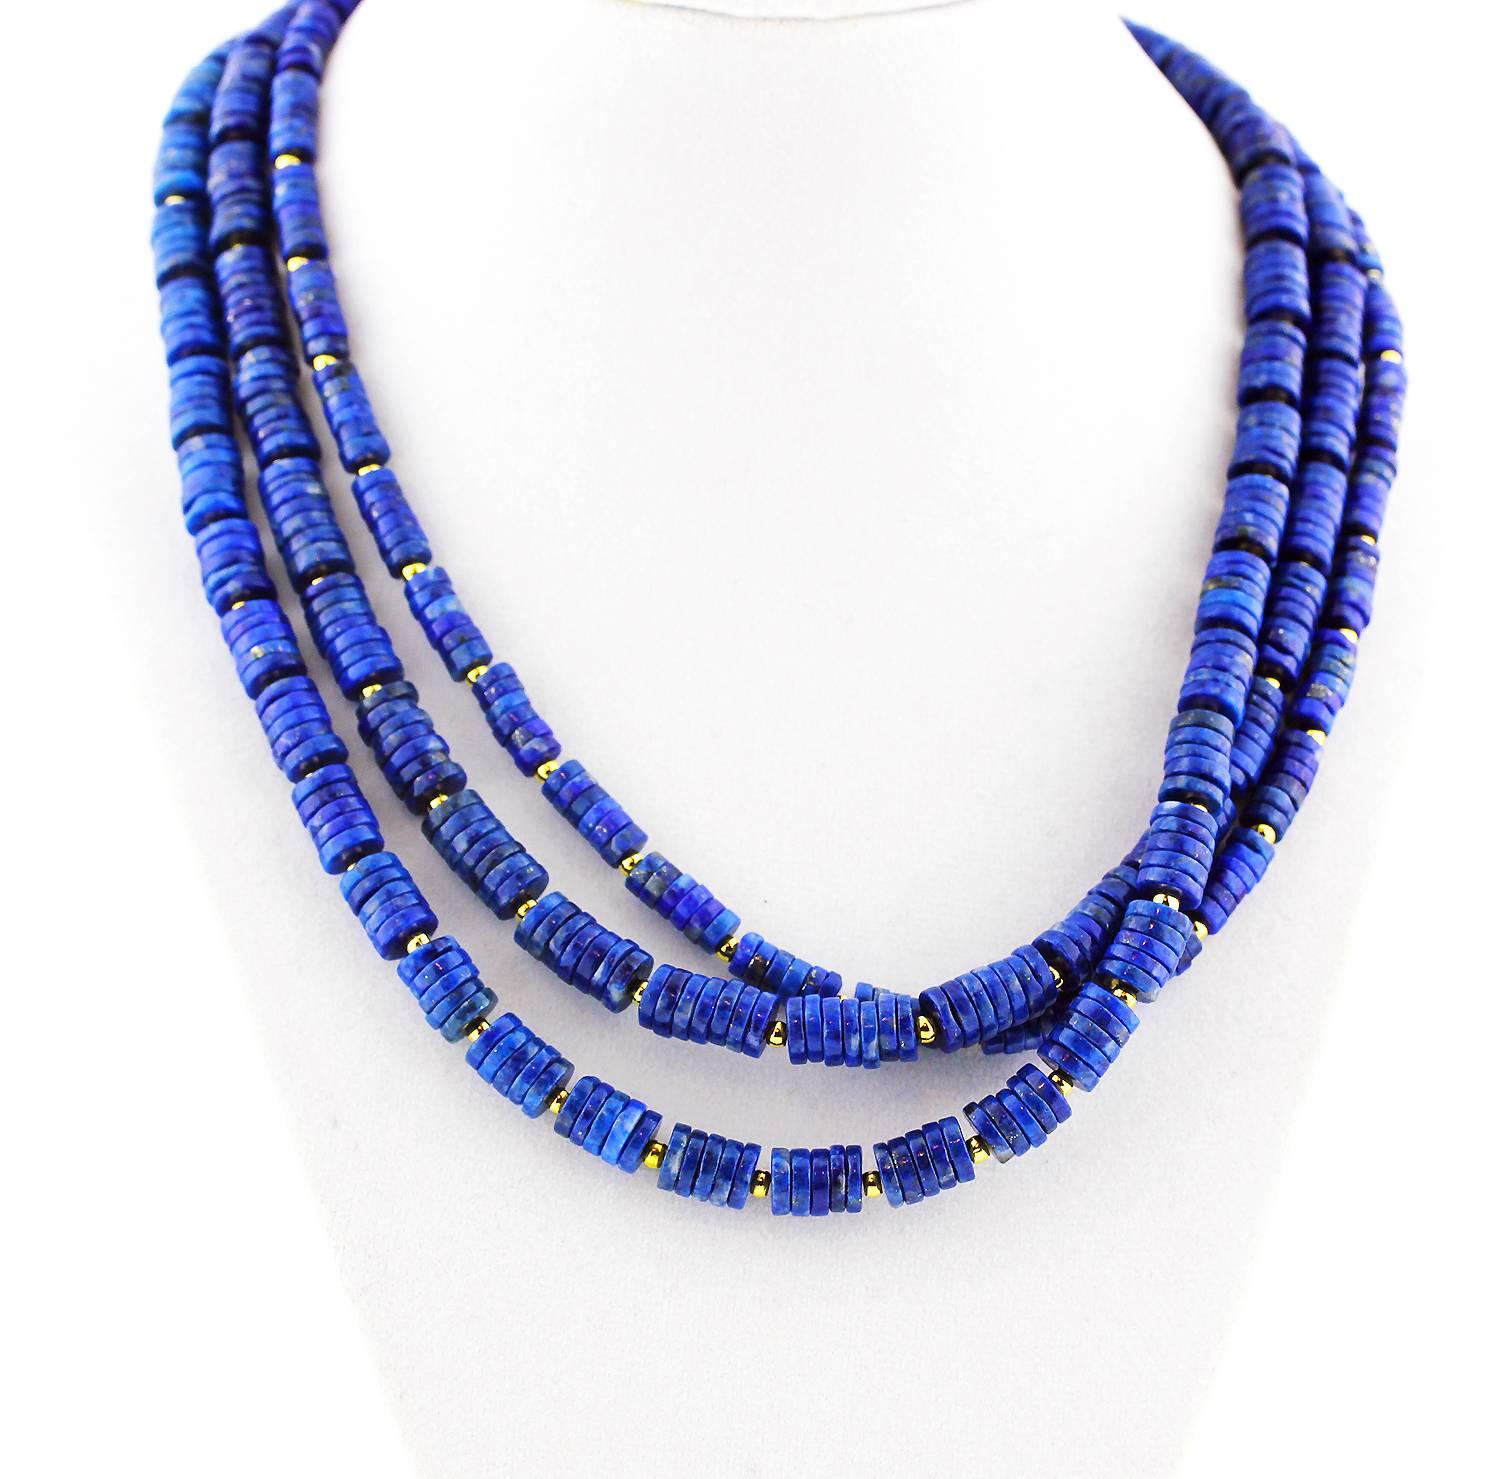 Triple strand of beautiful blue natural Lapis Lazuli with goldy accents
Size:  multi sizes largest approximately 7.5 mm
Length:  18 inches
Clasp:  gold plated